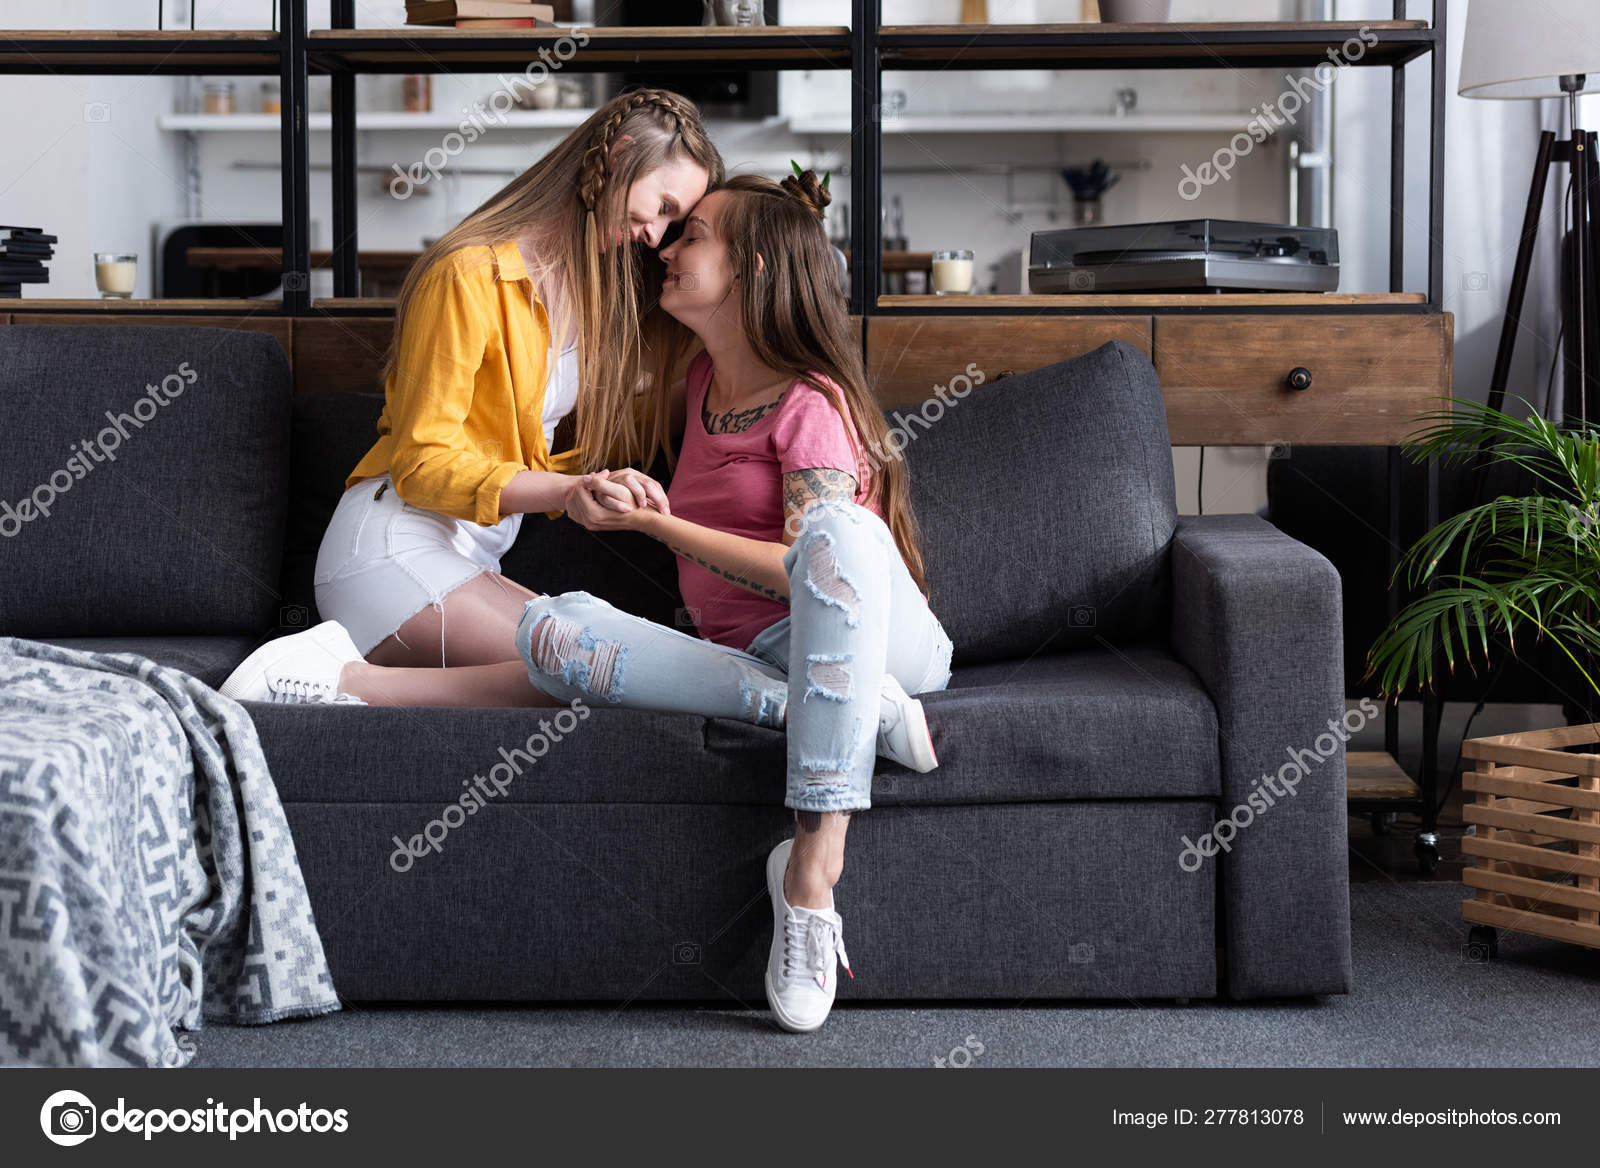 On the couch lesbians Why it's